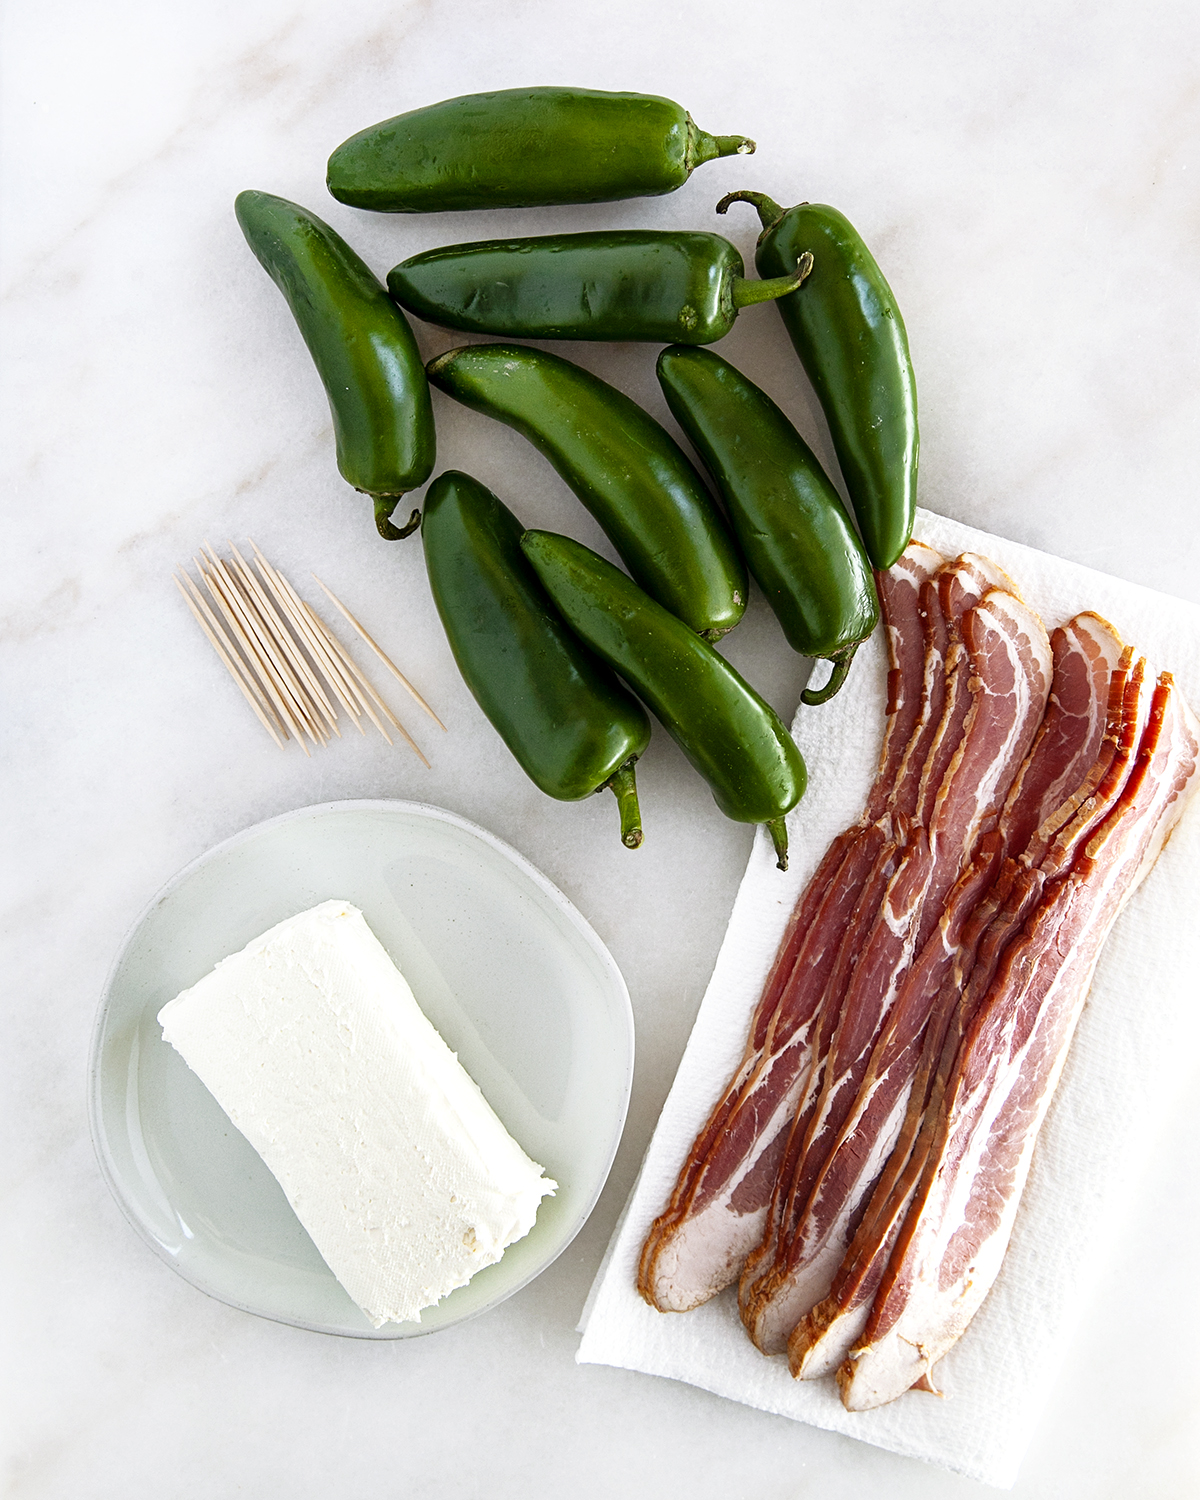 Ingredients to make grilled jalapeno poppers on a white countertop.